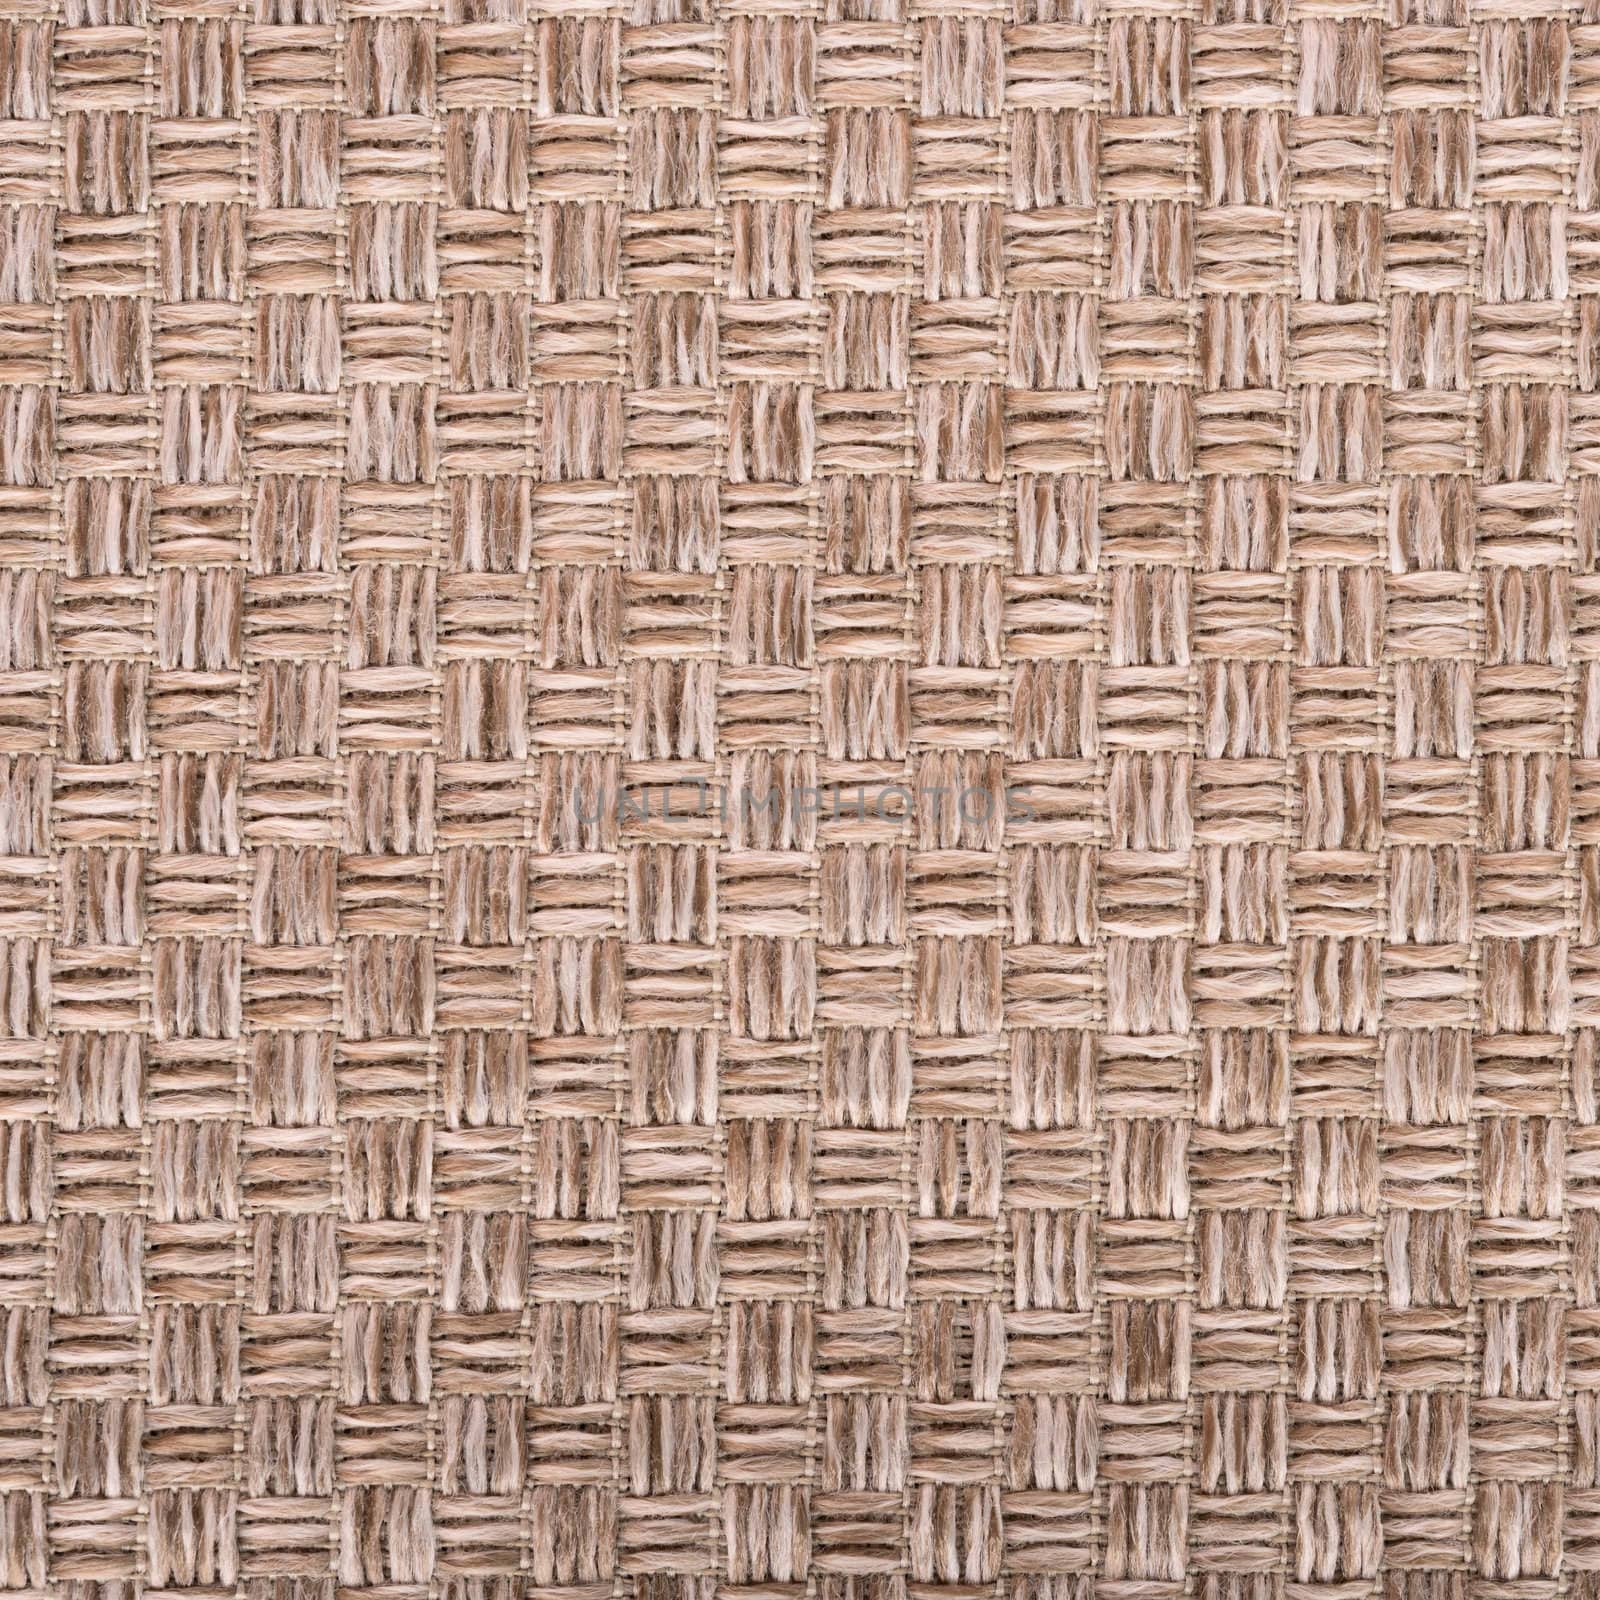 Background of textile texture by Emevil